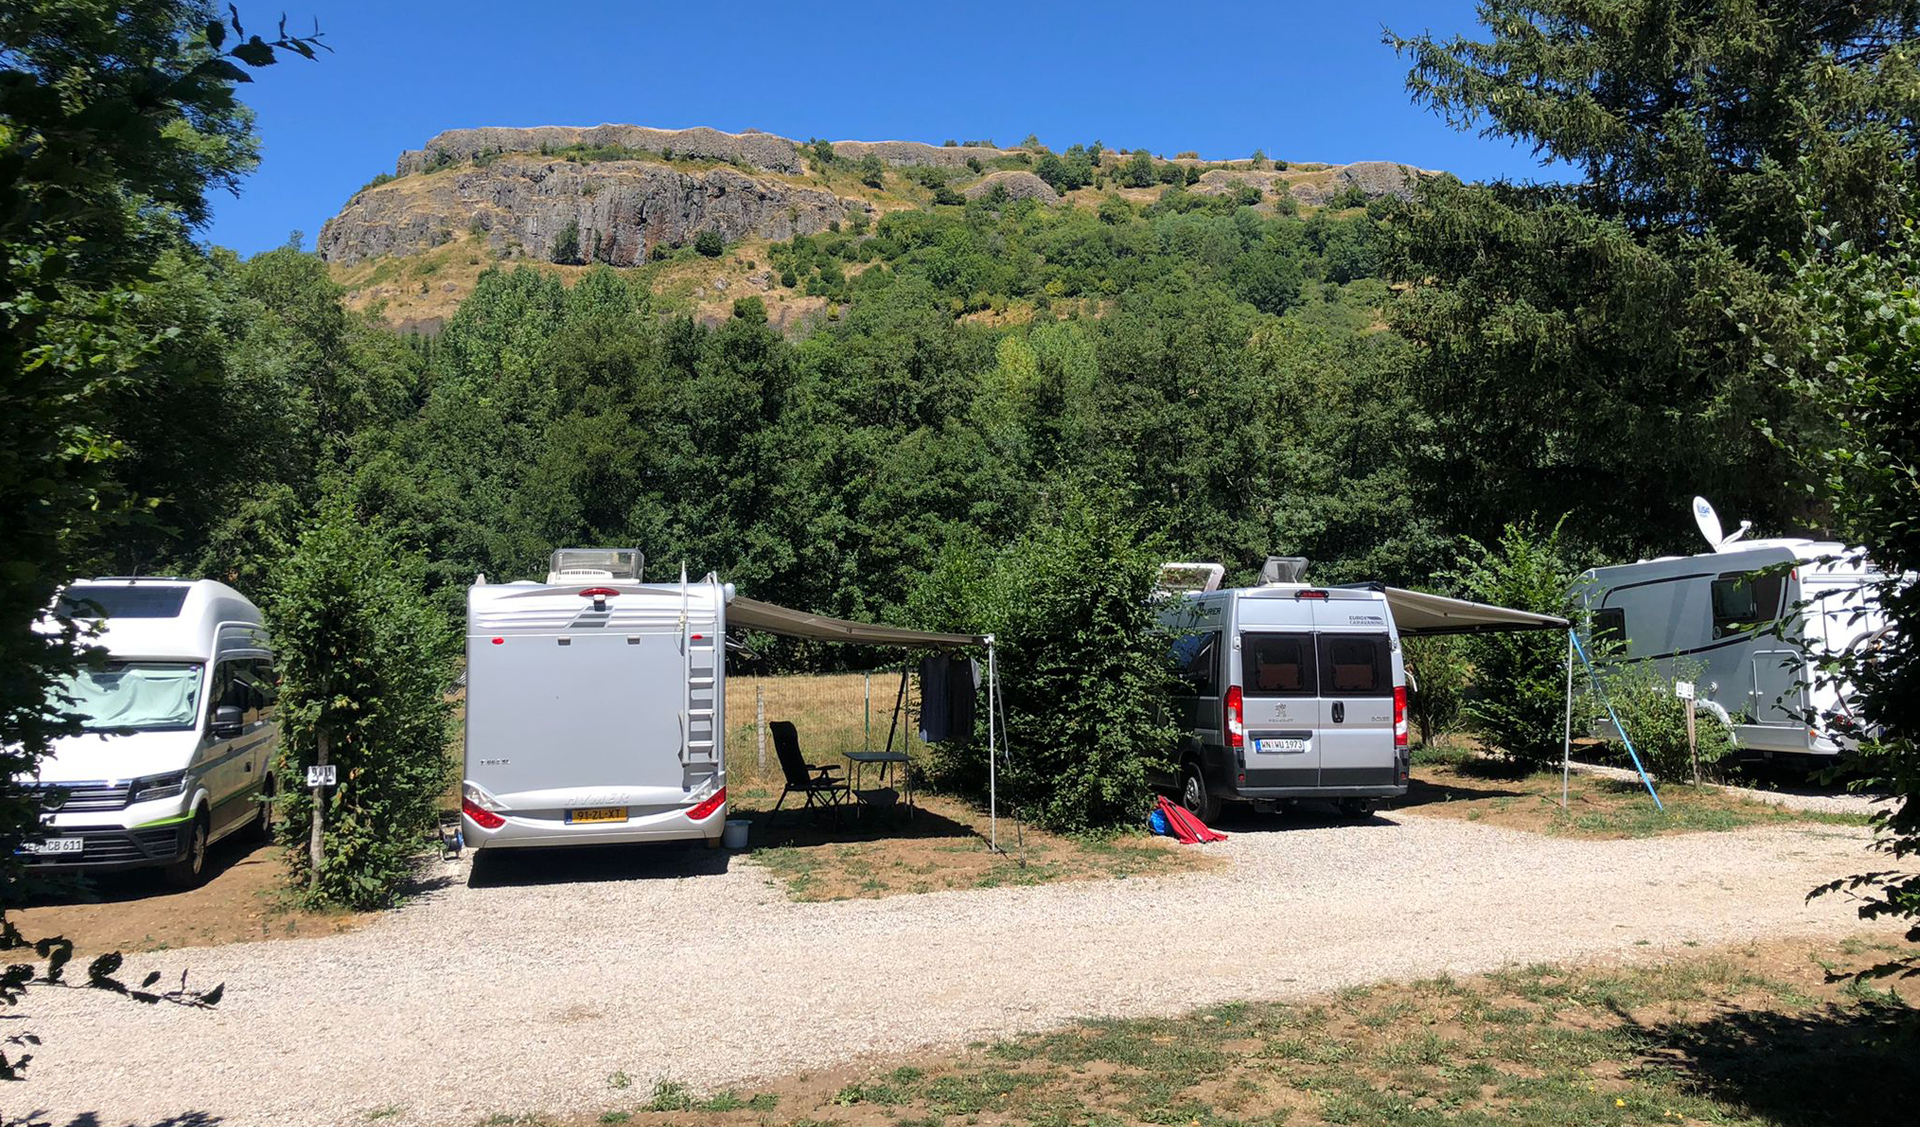 High season at our French campsite! (newsletter)